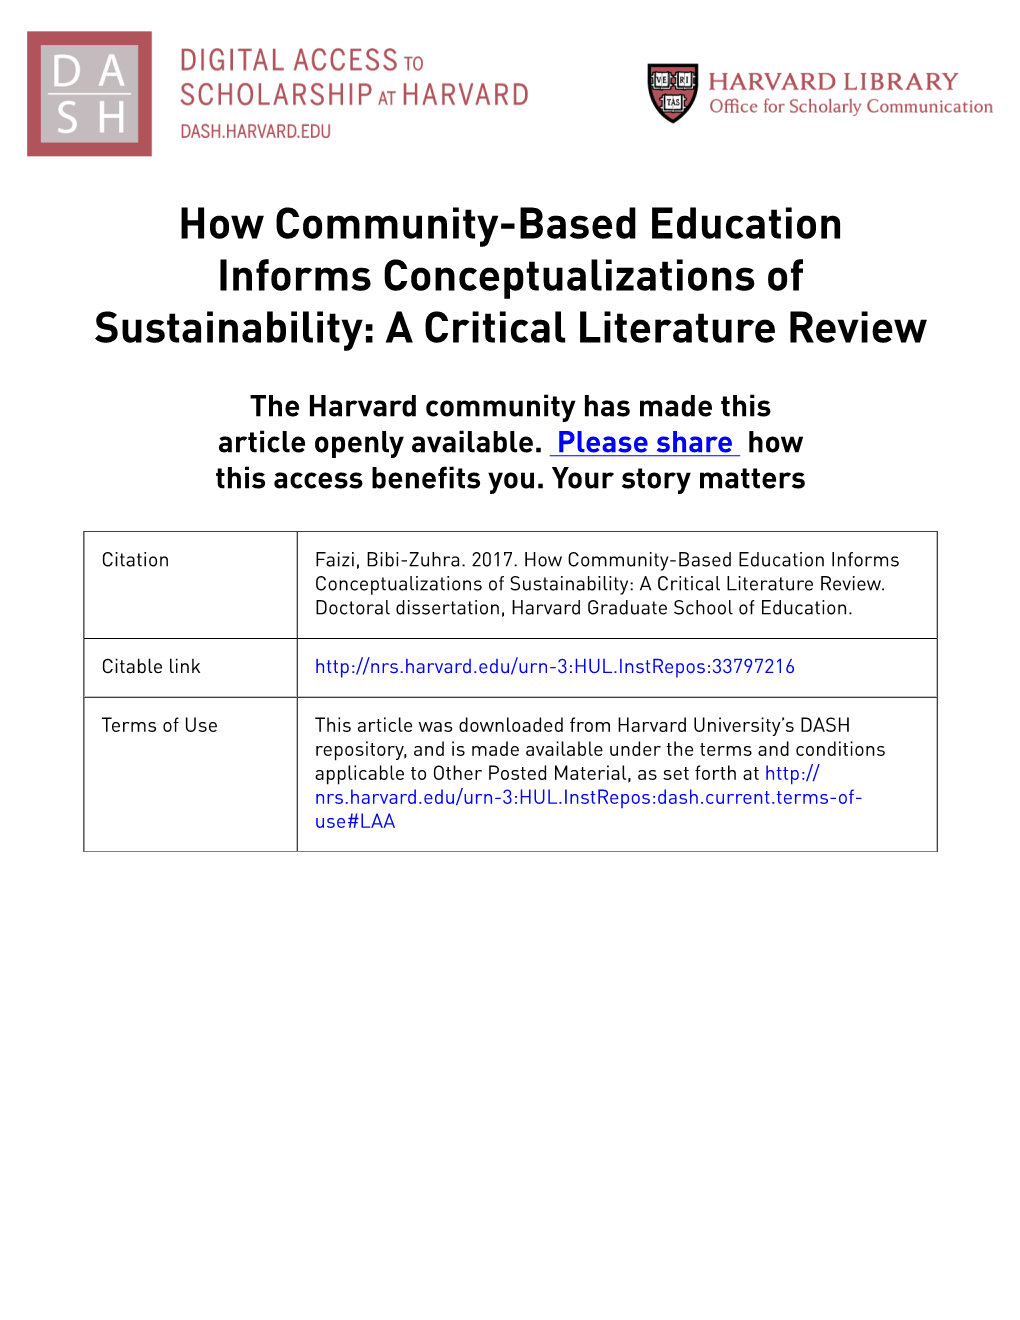 How Community-Based Education Informs Conceptualizations of Sustainability: a Critical Literature Review